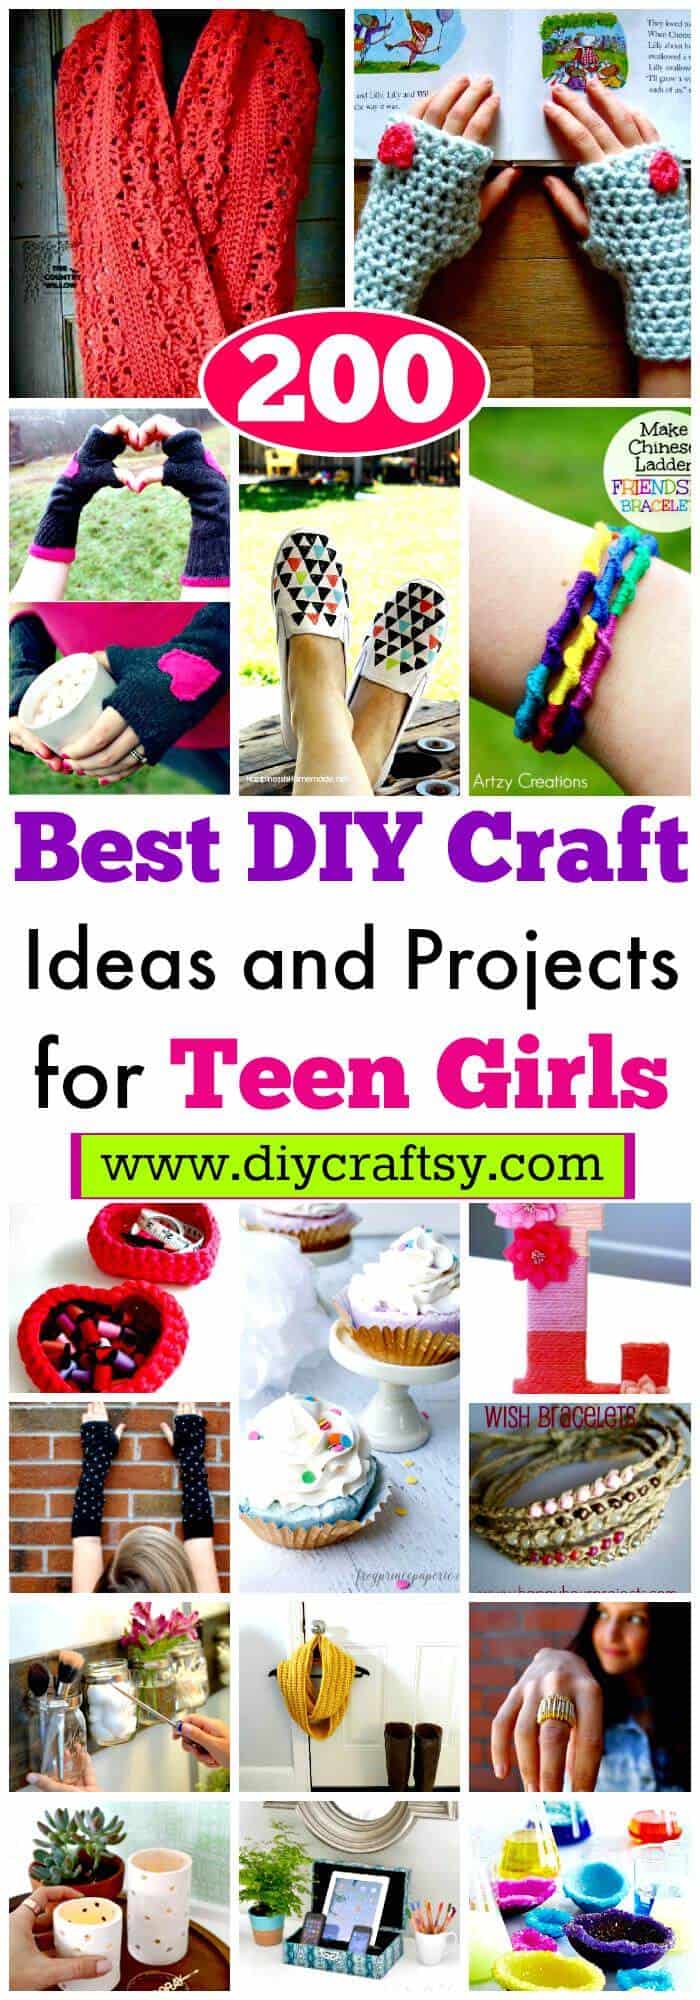 200-Best-DIY-Craft-Ideas-and-Projects-for-Teen-Girls